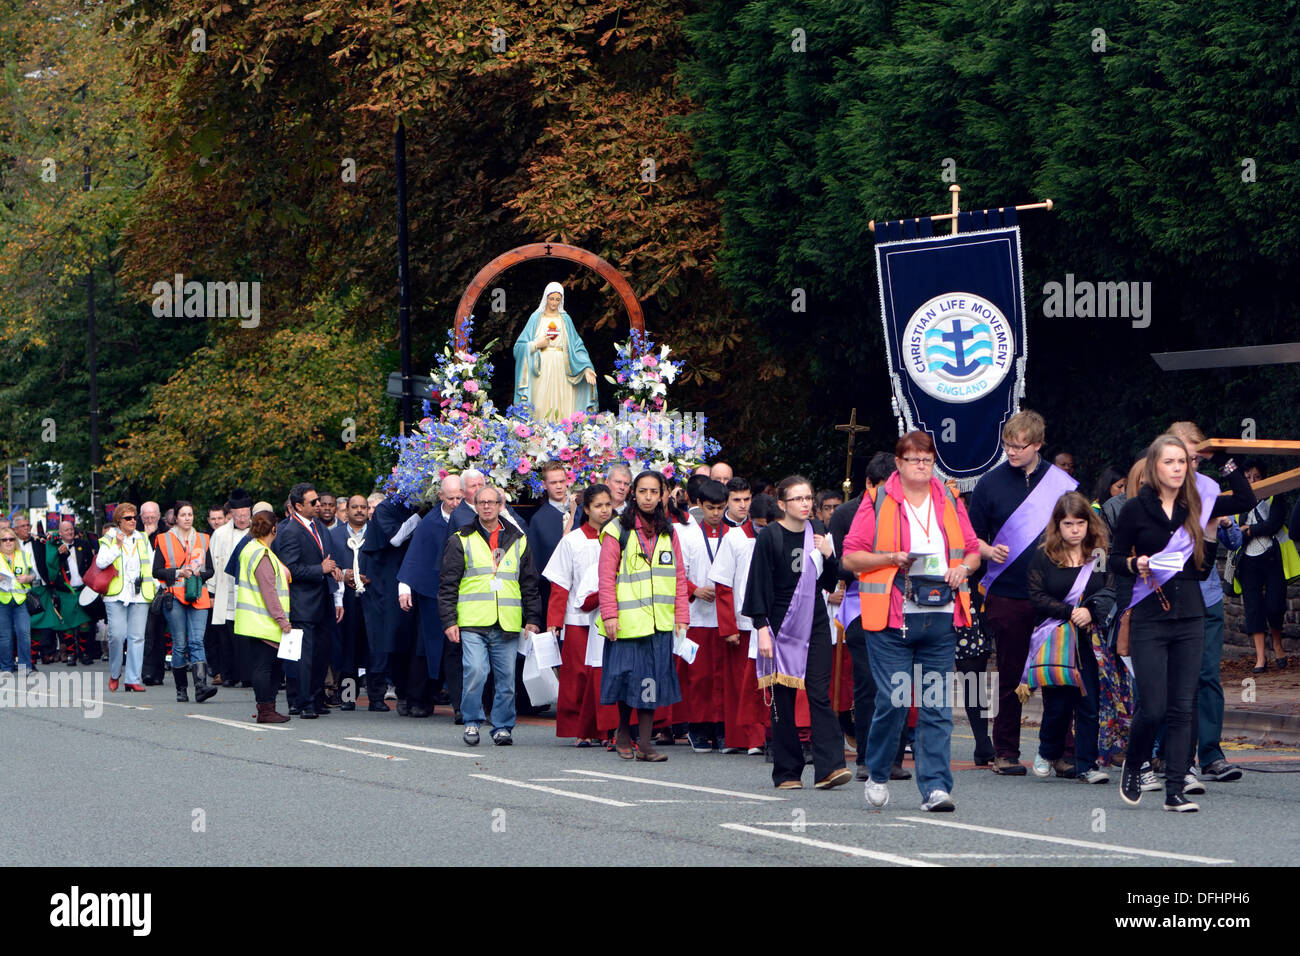 Marian Procession  Manchester, UK  05 October 2013 An estimated thousand Catholics walk through South Manchester, praying the rosary and singing hymns as a visible expression of their faith. The procession starts at St Edward's Church, Rusholme and goes along Wilmslow Road to Fallowfield before going into Platts Fields Park for a short service. Credit:  John Fryer/Alamy Live News Stock Photo